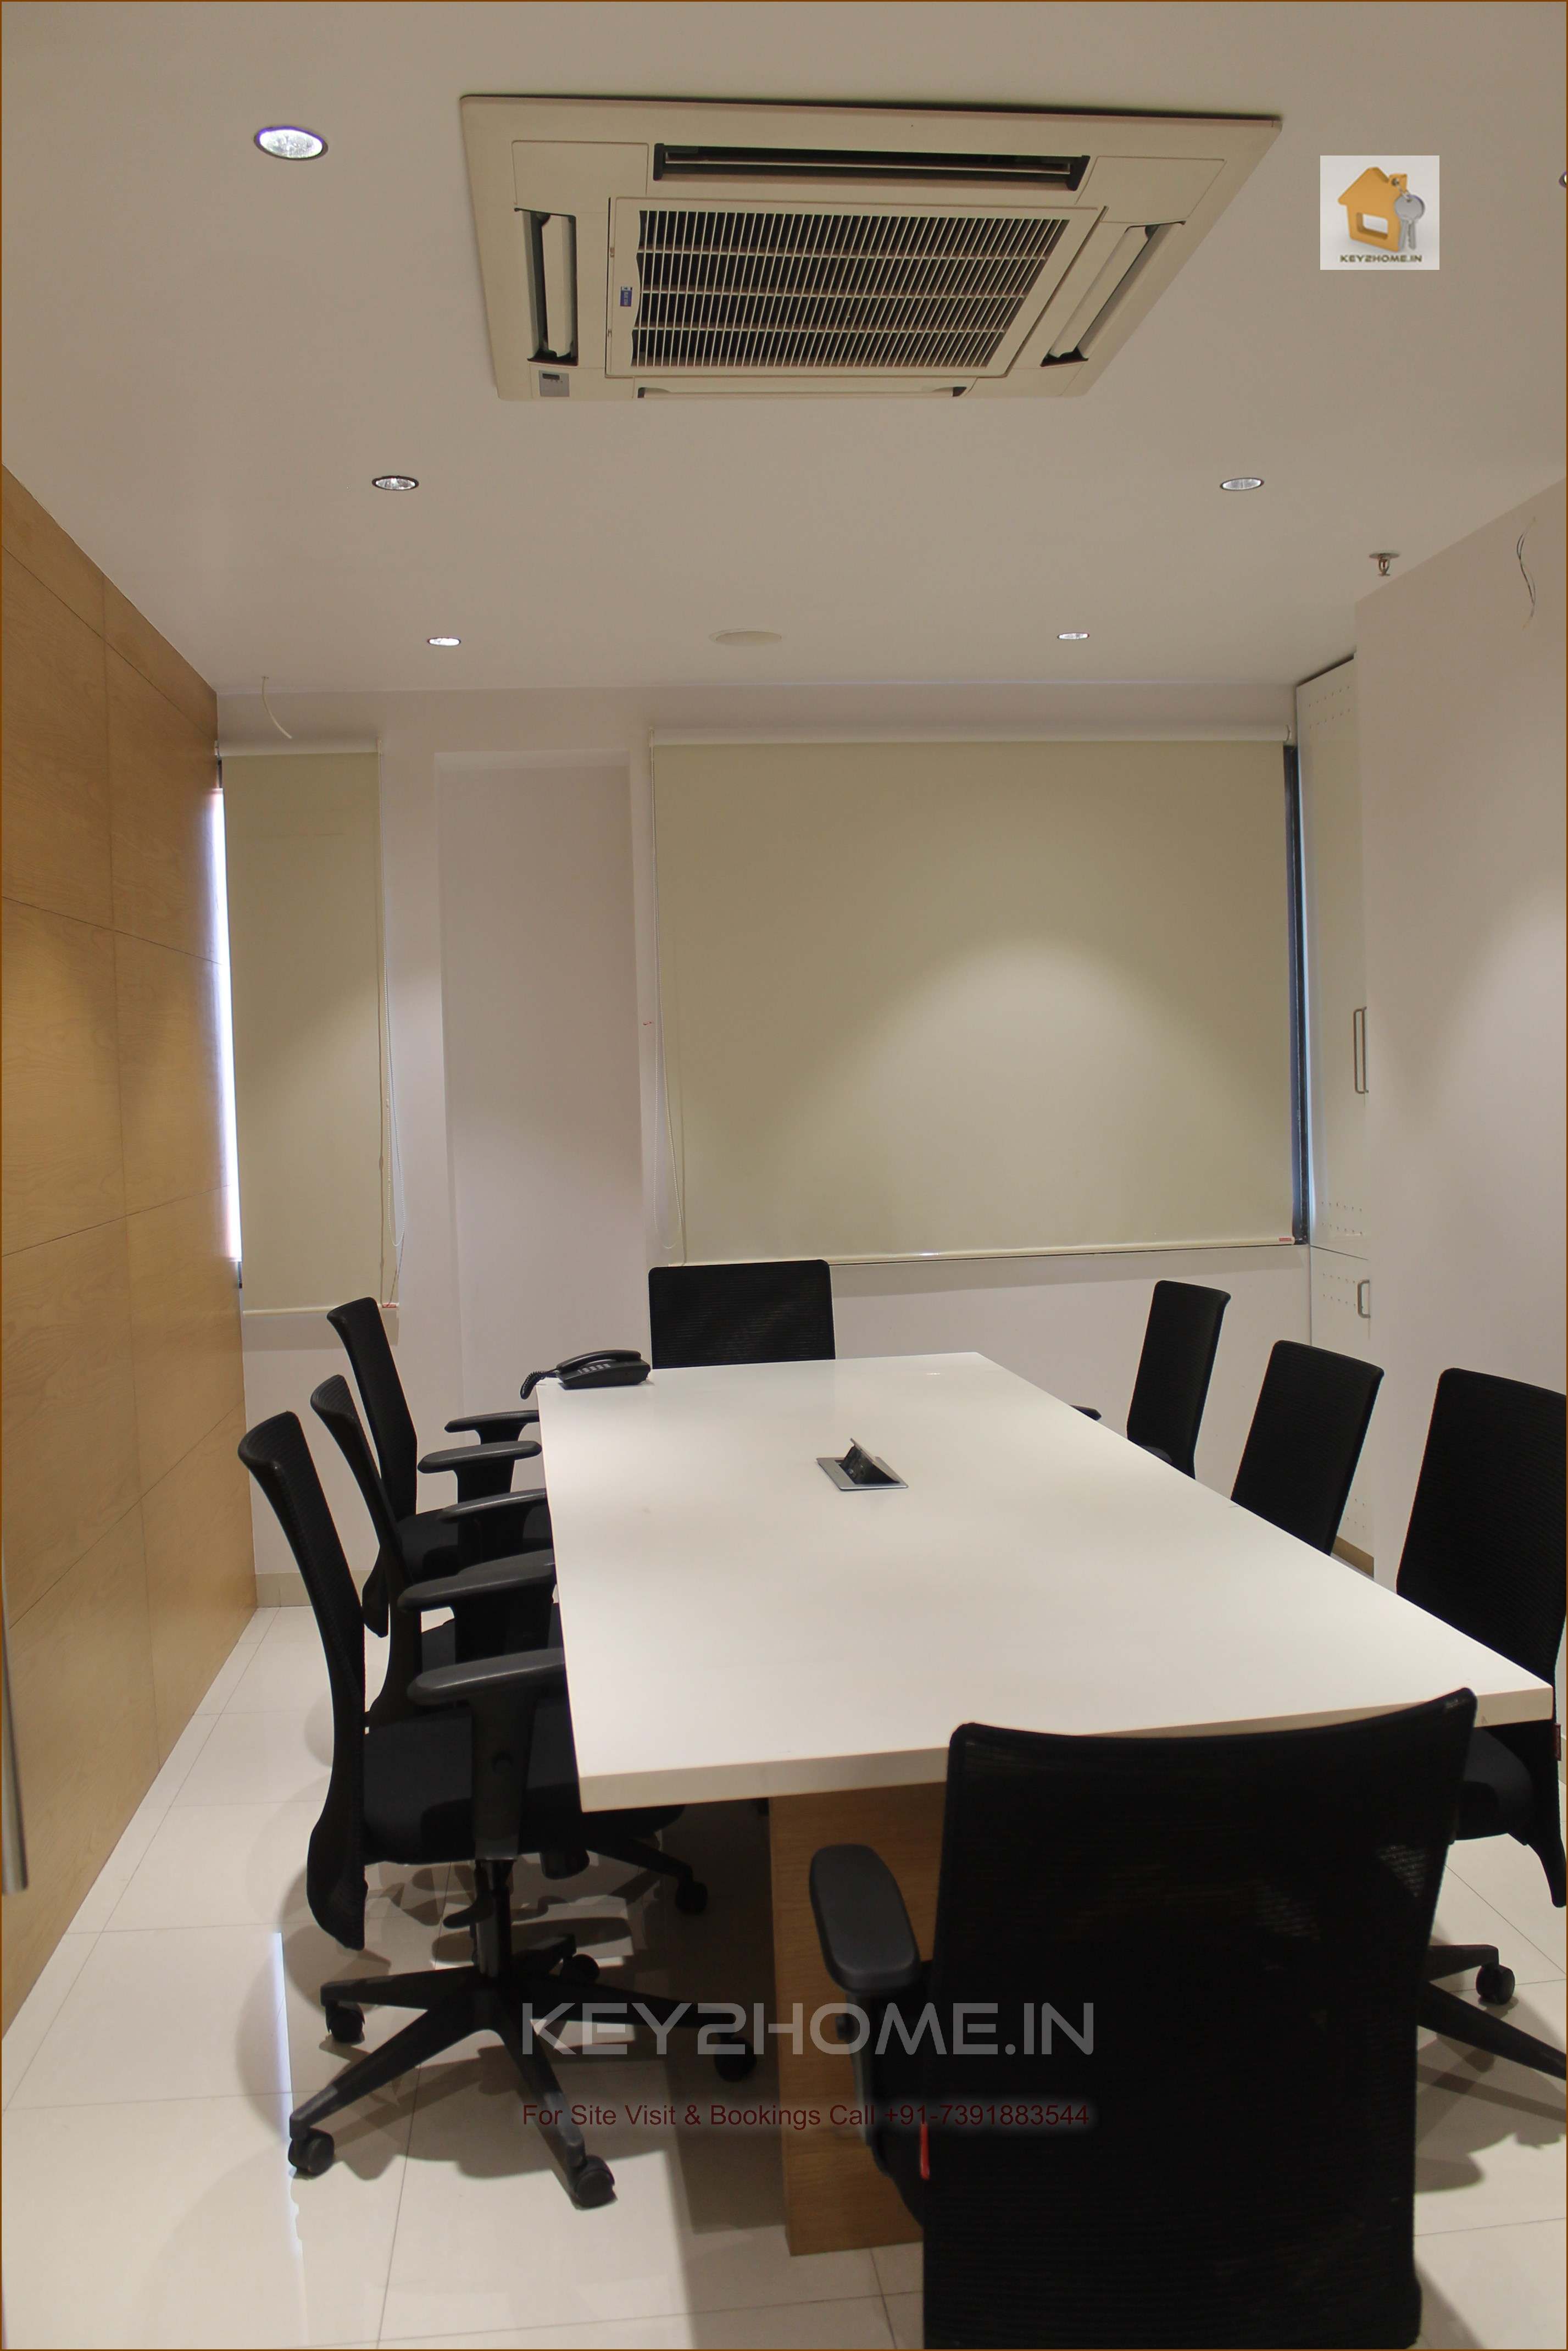 Commercial Office space on rent in Hinjewadi near wakad bridge Confrence room